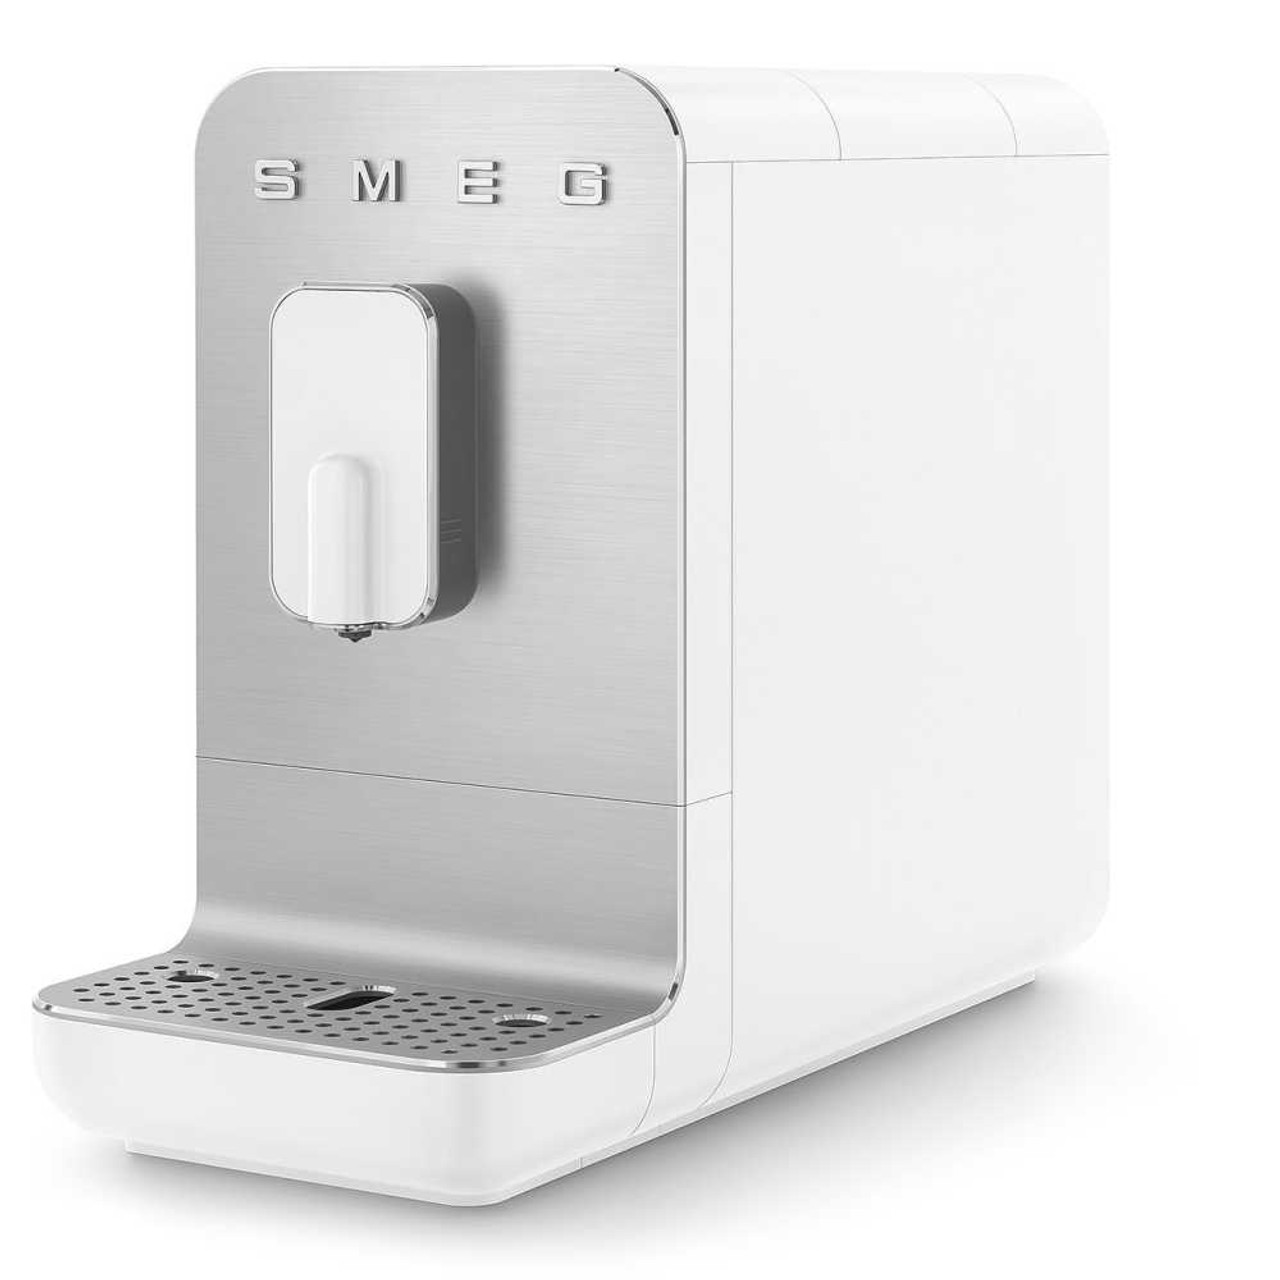 https://cdn11.bigcommerce.com/s-hccytny0od/images/stencil/1280x1280/products/4256/19578/SMEG_Espresso_Coffee_Machine_in_White__53460.1655577441.jpg?c=2?imbypass=on